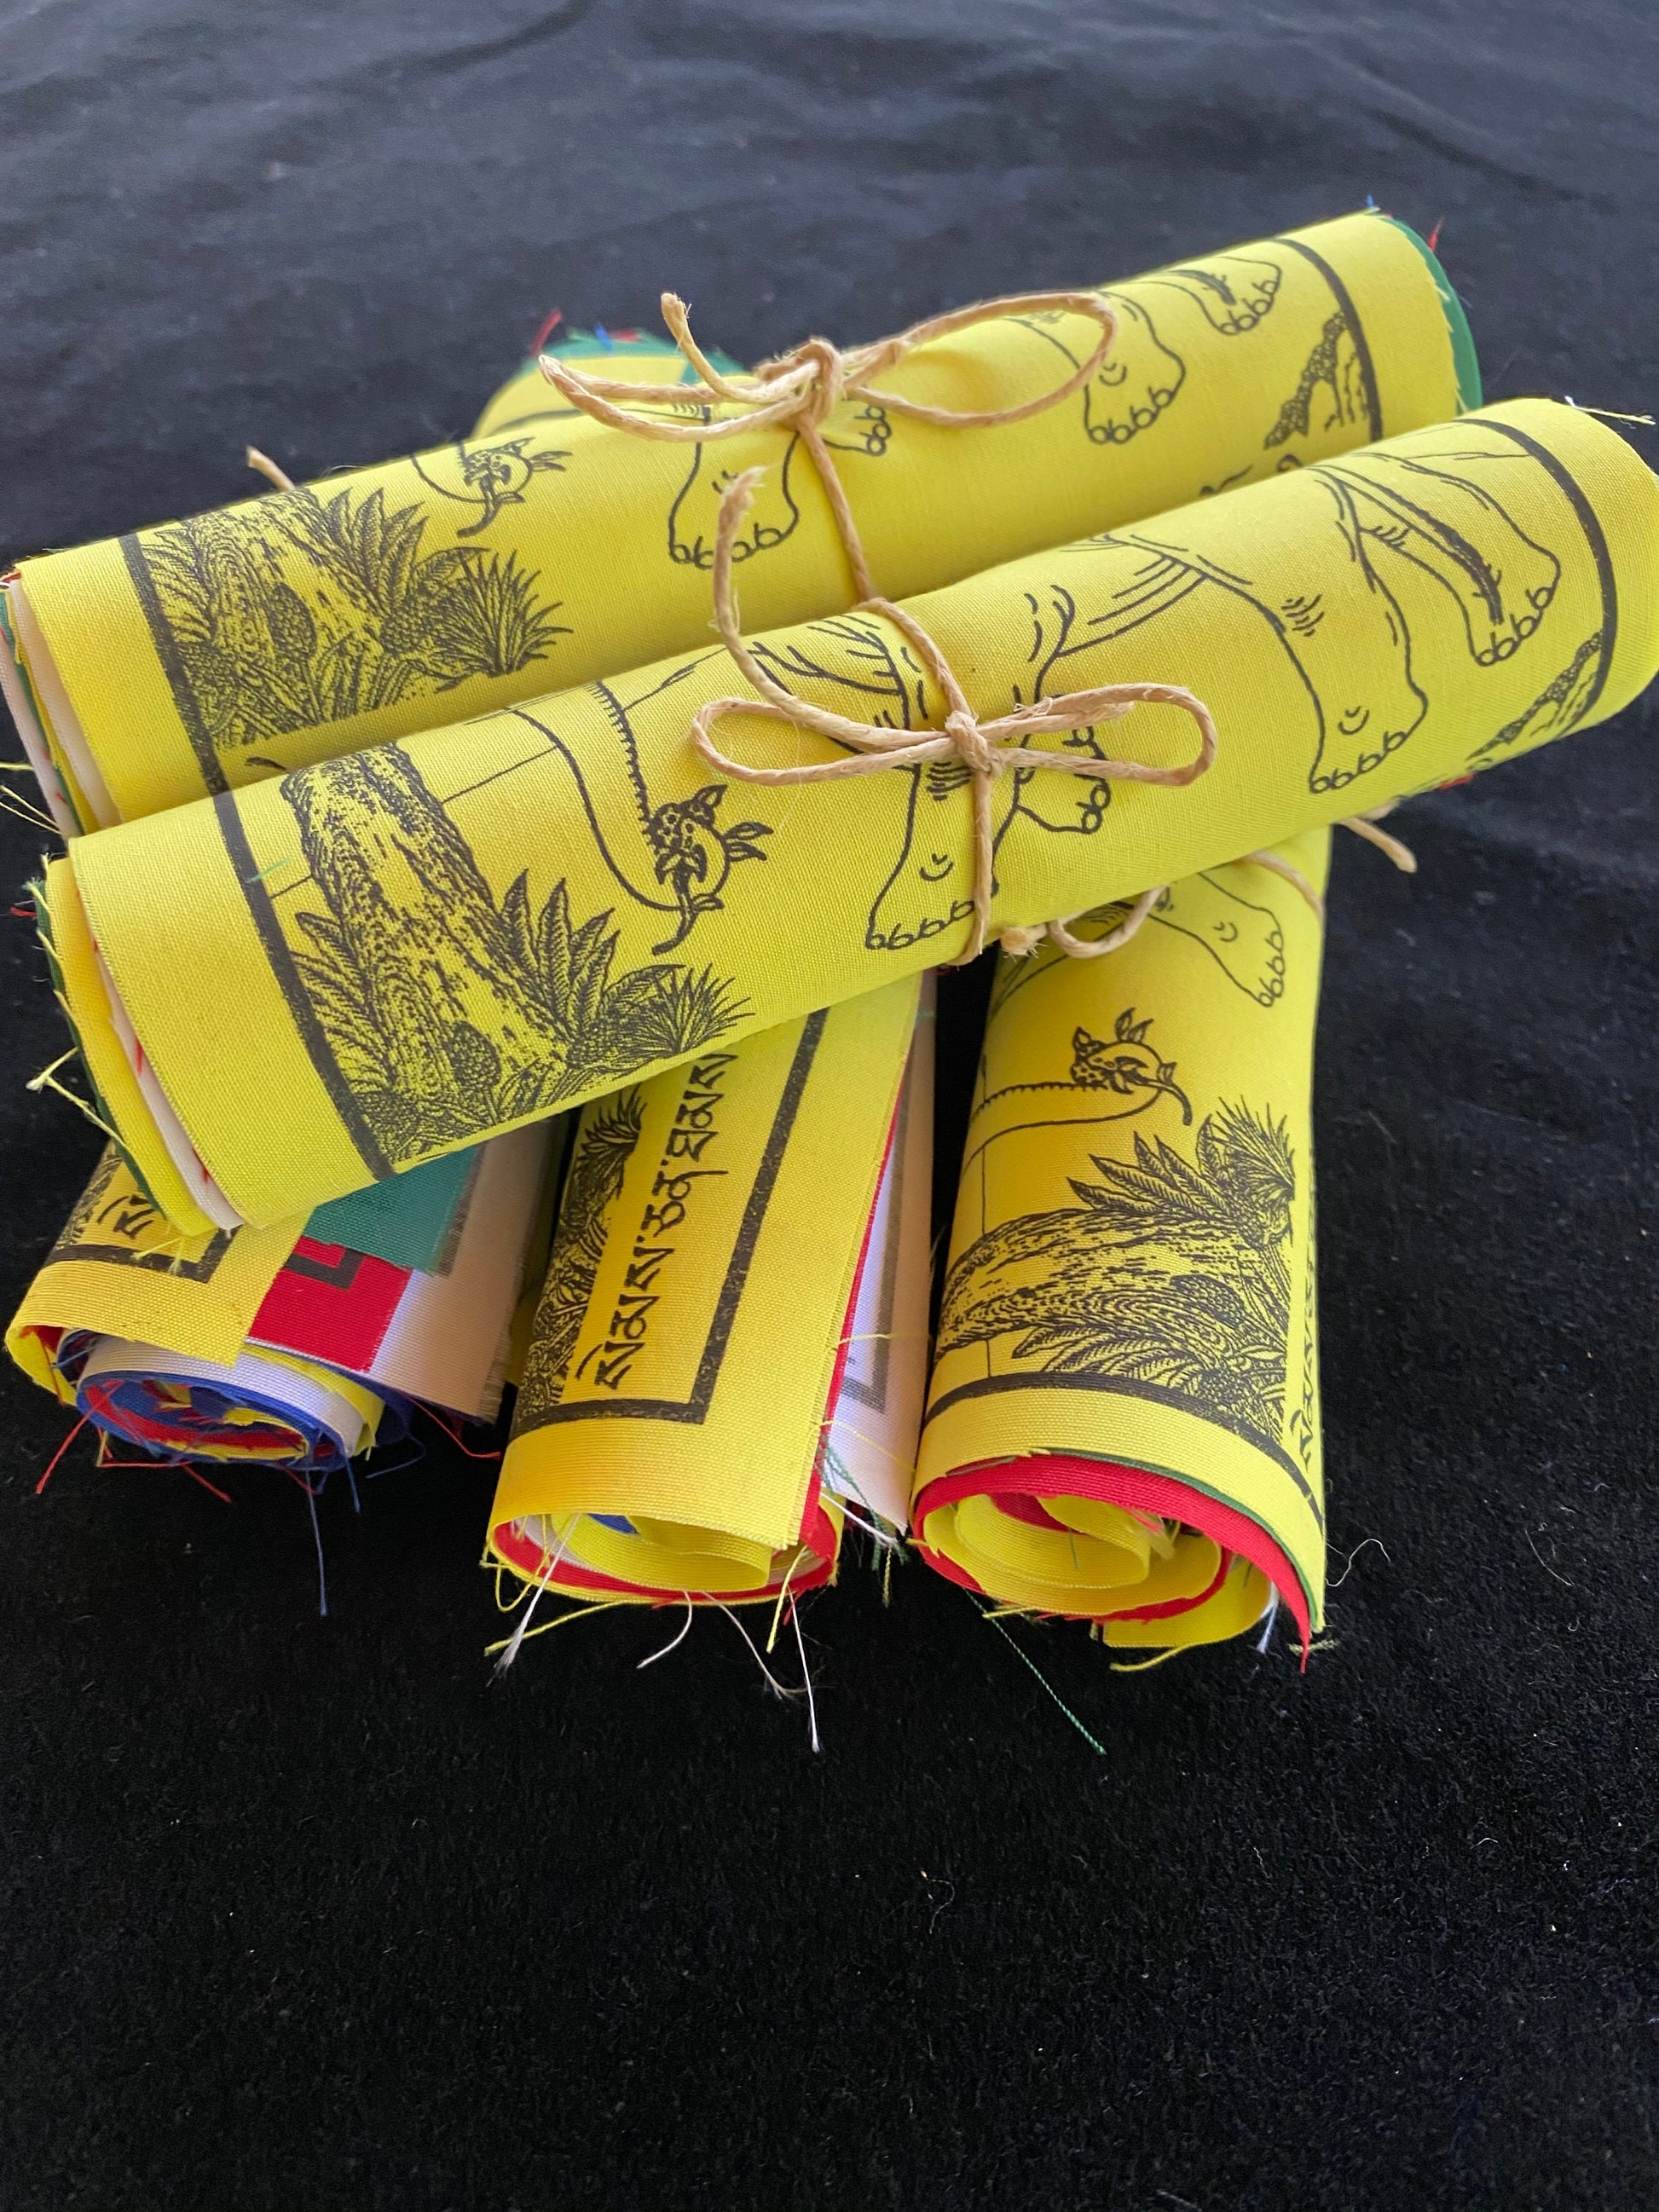 5 offset rolls of 6 inch by 7.5 inch 4 Harmonius Friends prayer flags in five colors stacked on a black background